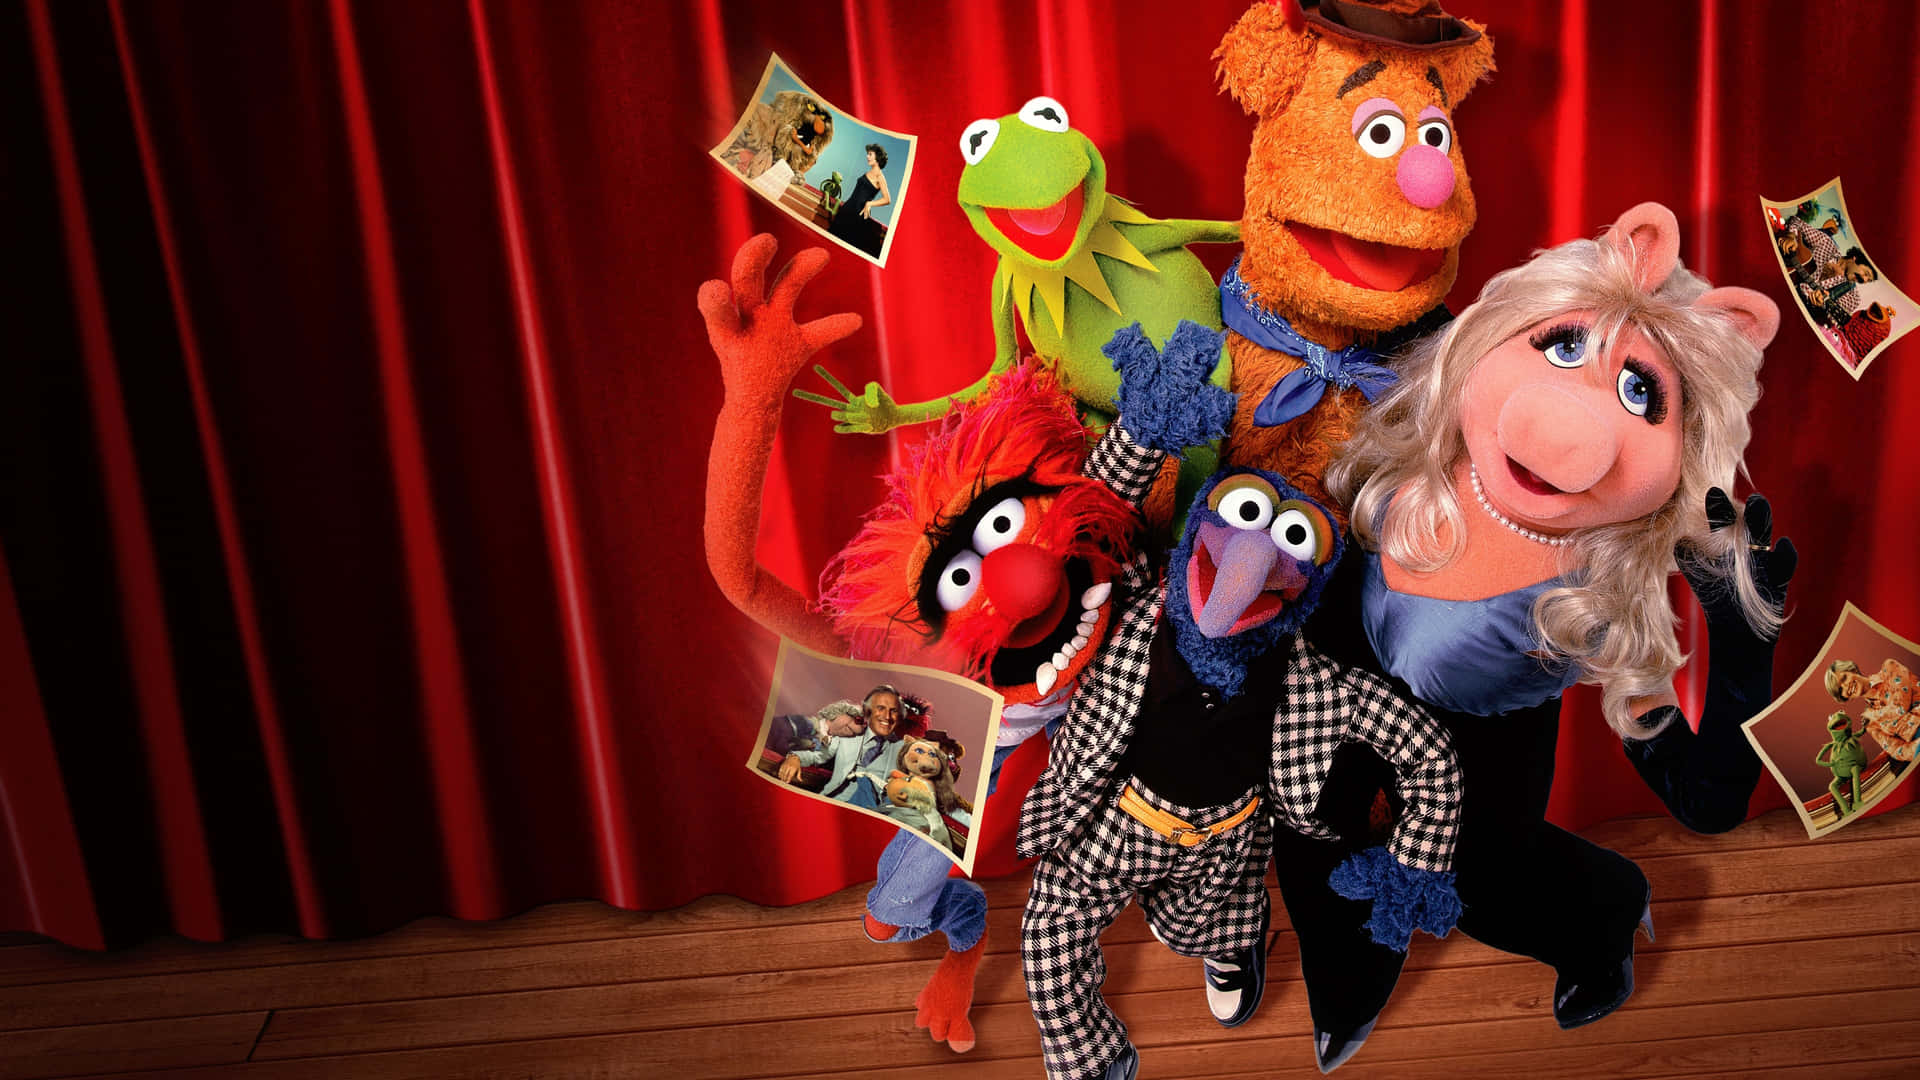 A Classic Throwback to the Iconic Muppet, Animal Wallpaper